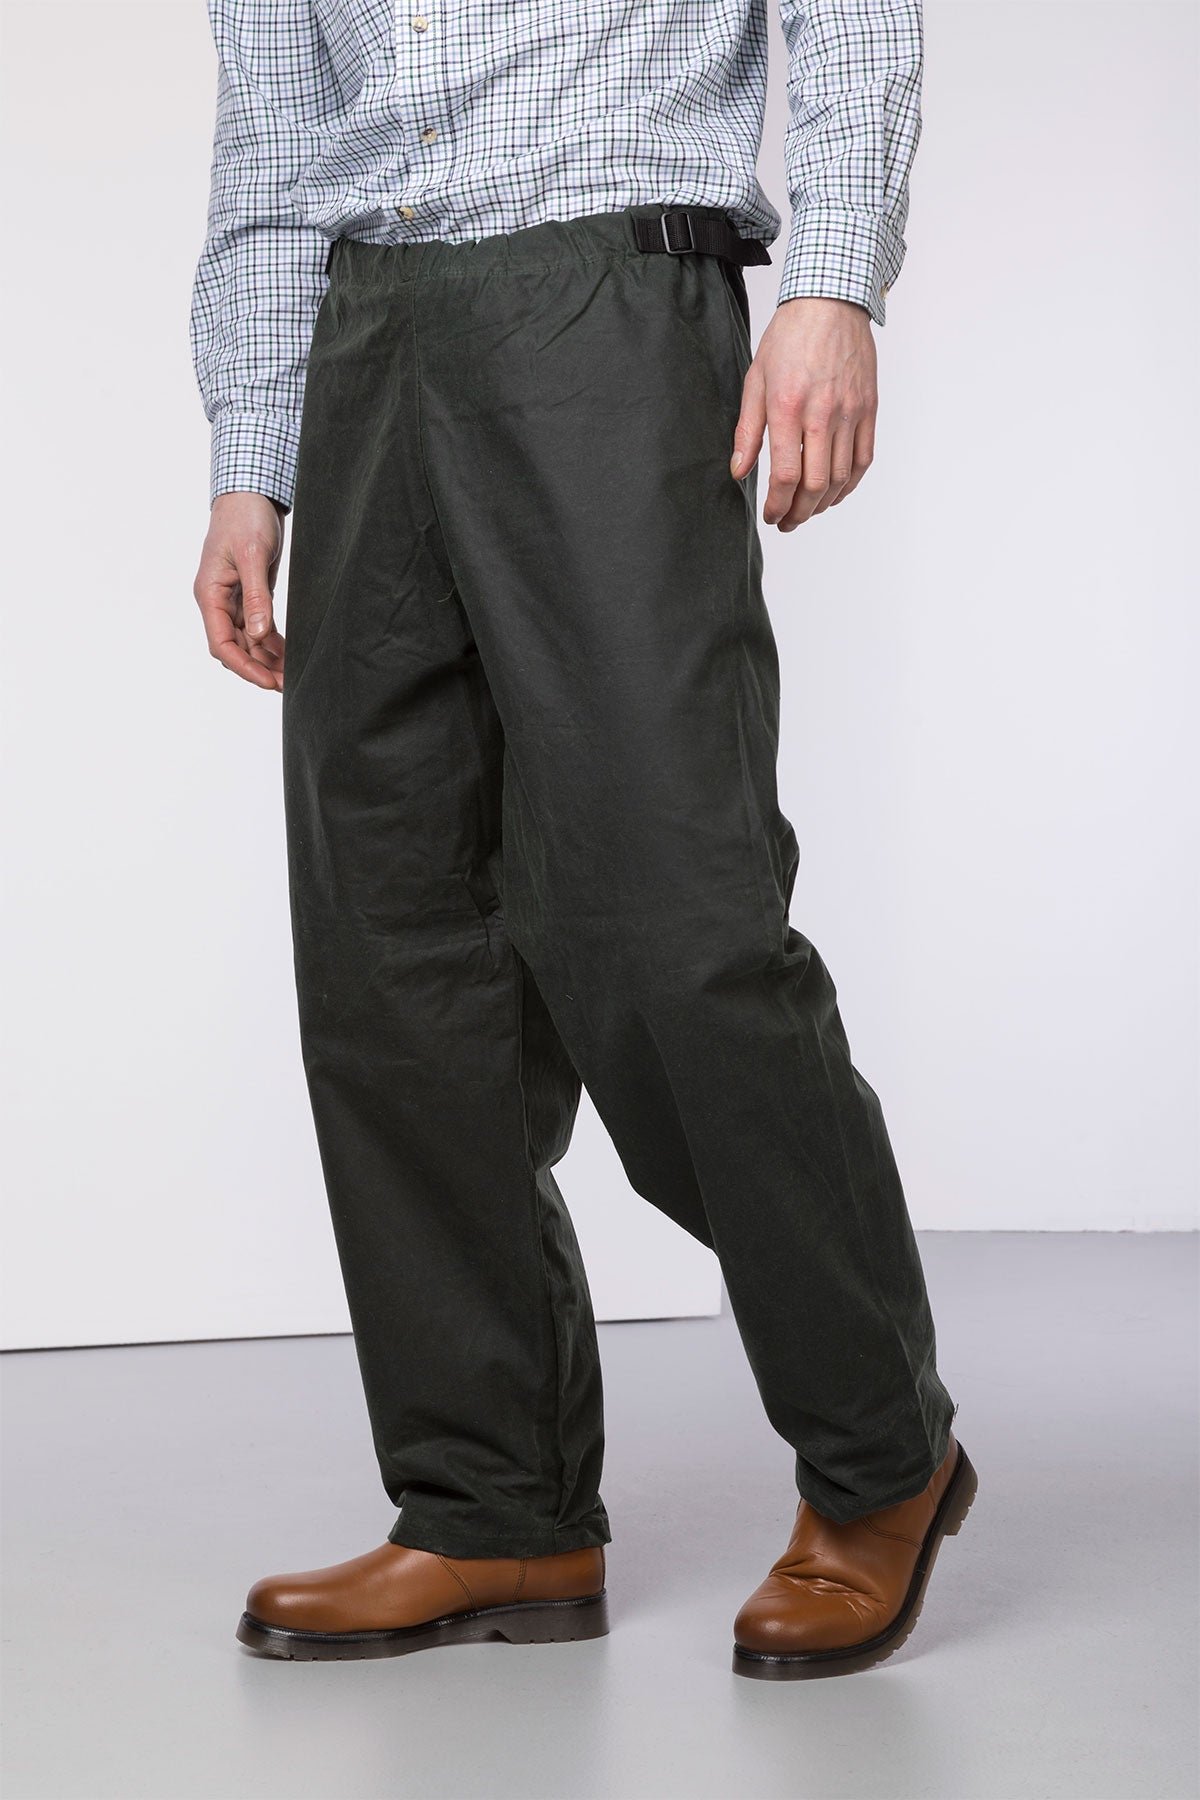 Mens Waterproof Wax Cotton Overtrousers UK | Rydale